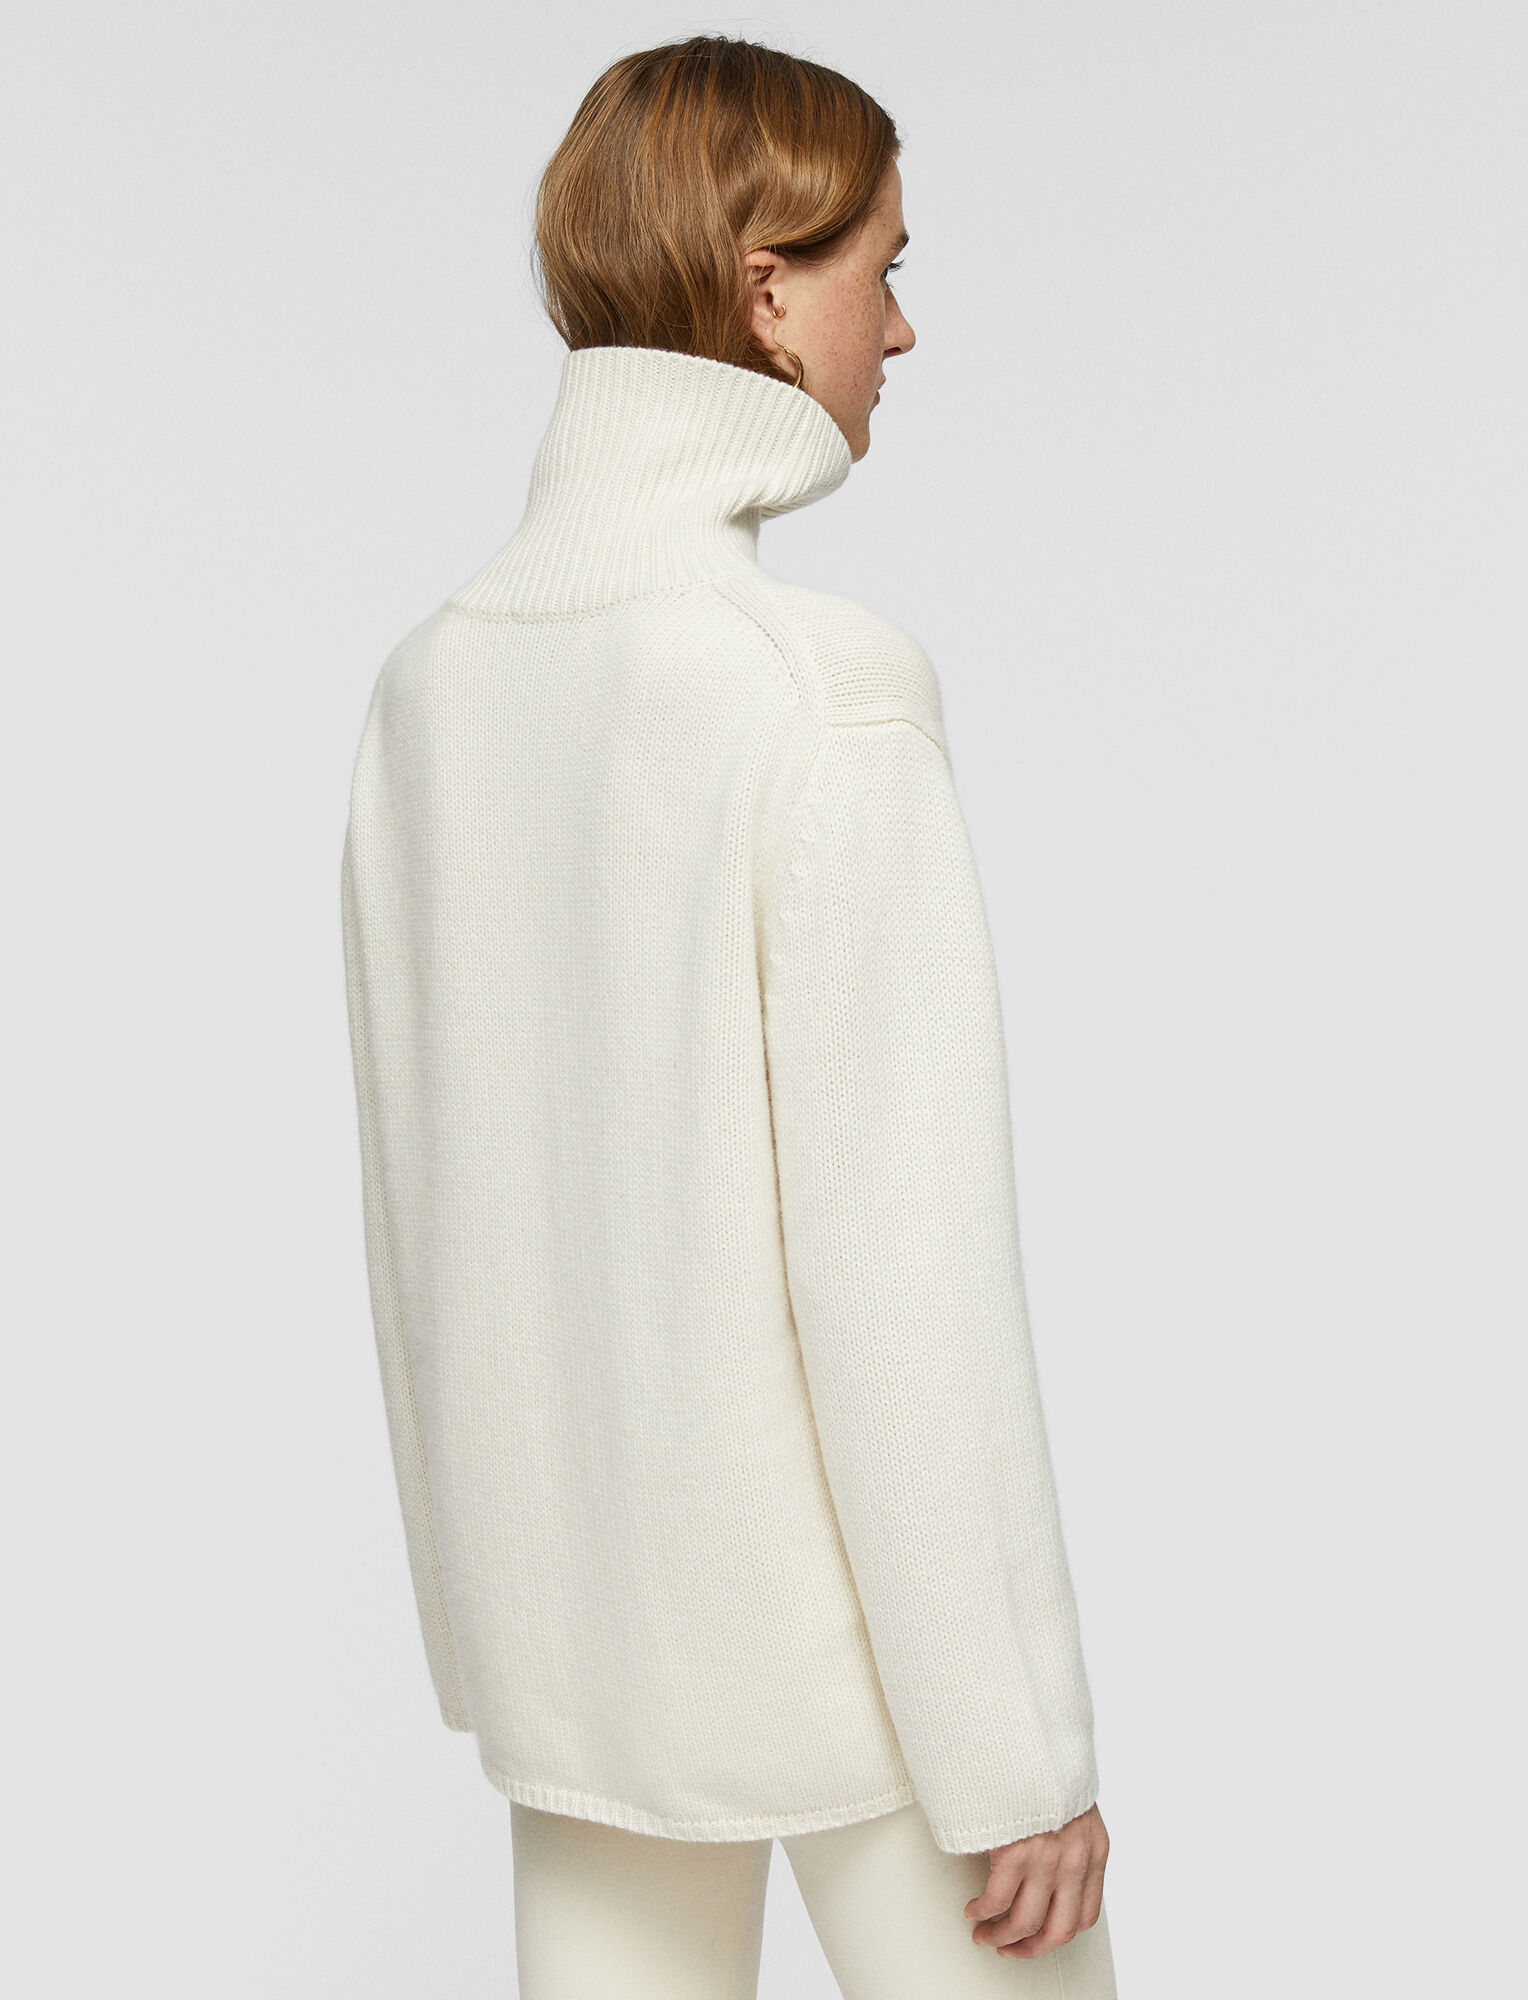 Joseph, Luxe Cashmere High Neck Jumper, in Papyrus